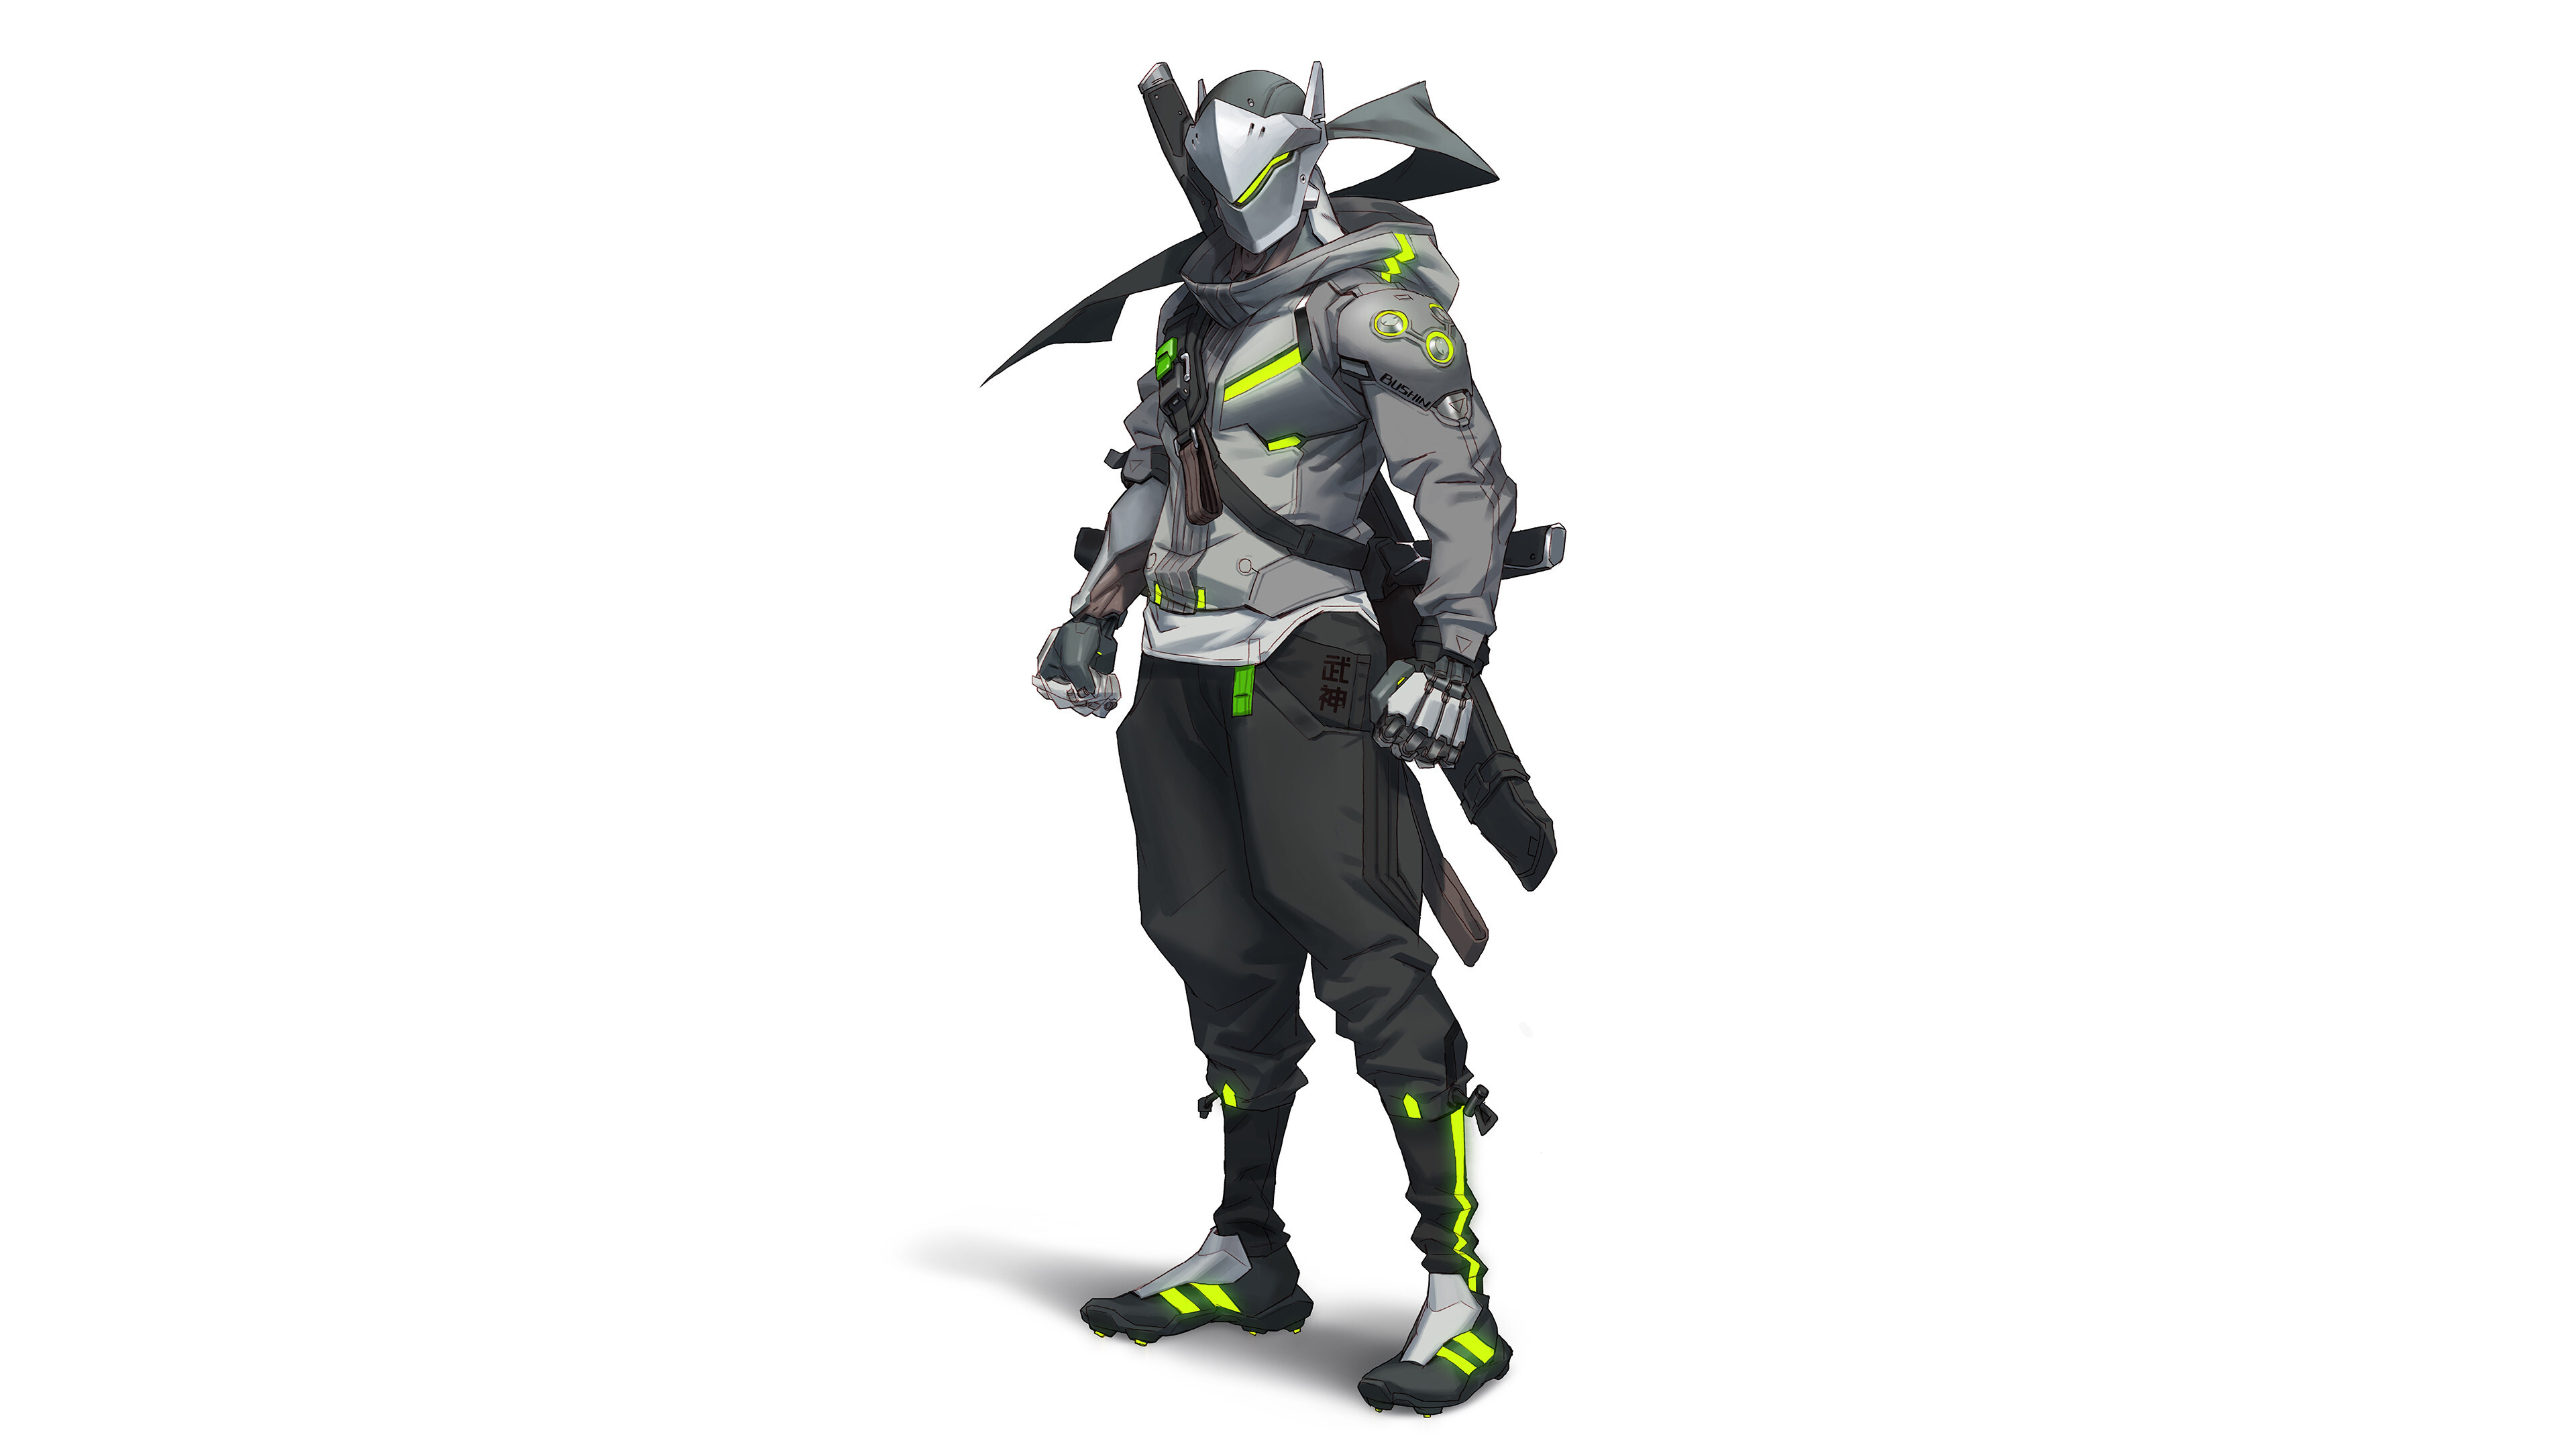 Genji: Overwatch 2, Delivers a Swift Strike with his technologically-advanced dragonblade that cuts down enemies. 3840x2160 4K Background.